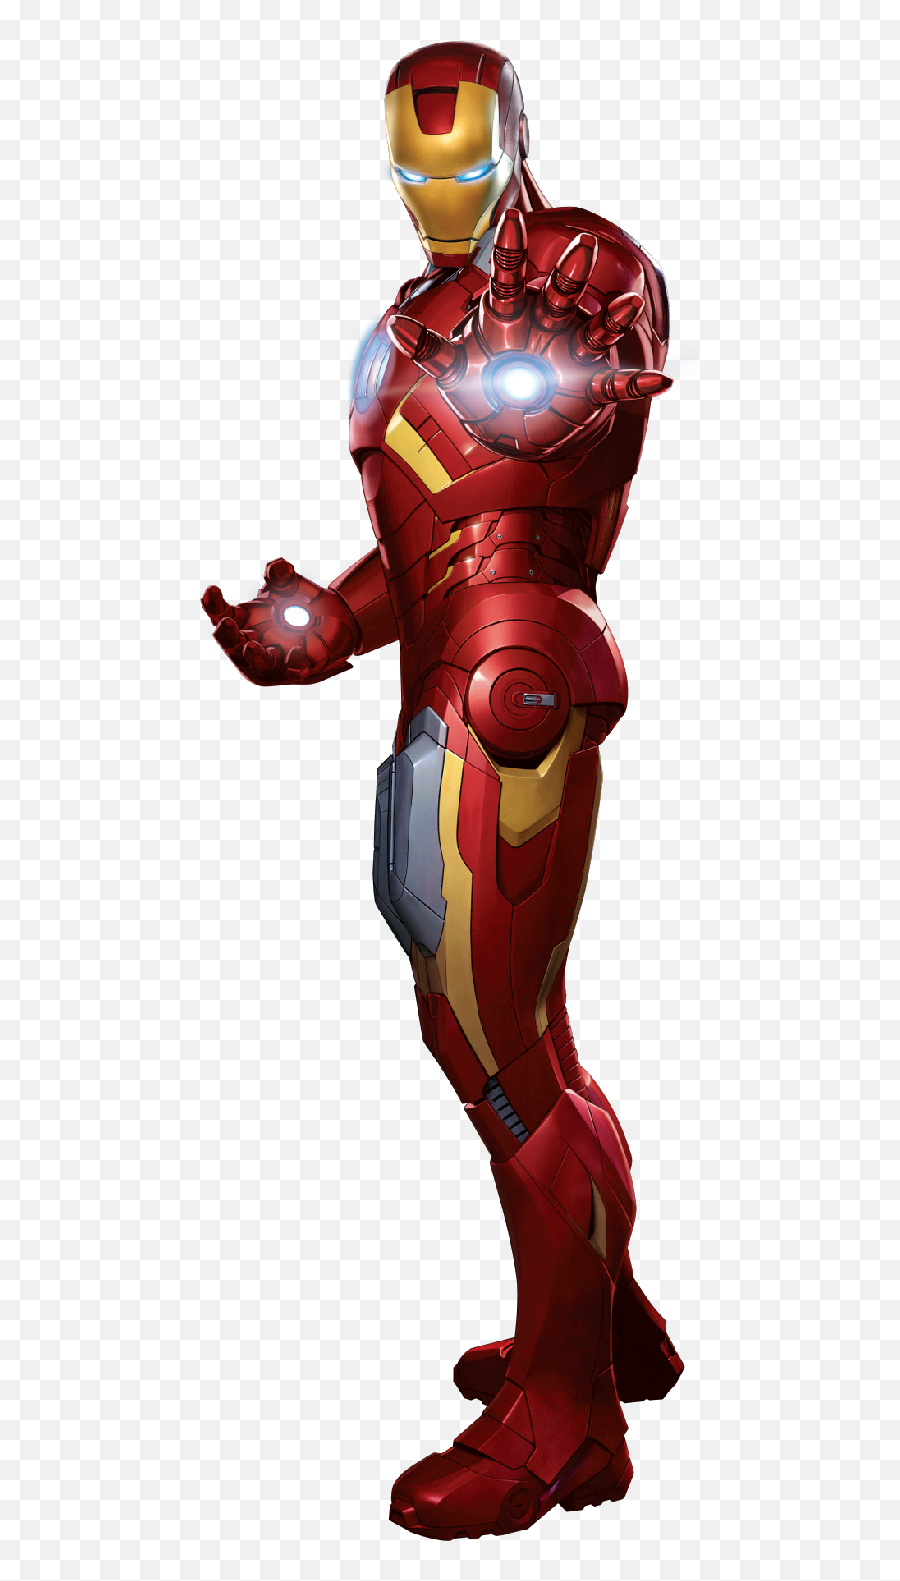 Download Ironman Avengers Png Image For - Release Date Iron Man 4 Emoji,Iron Man Emoticon